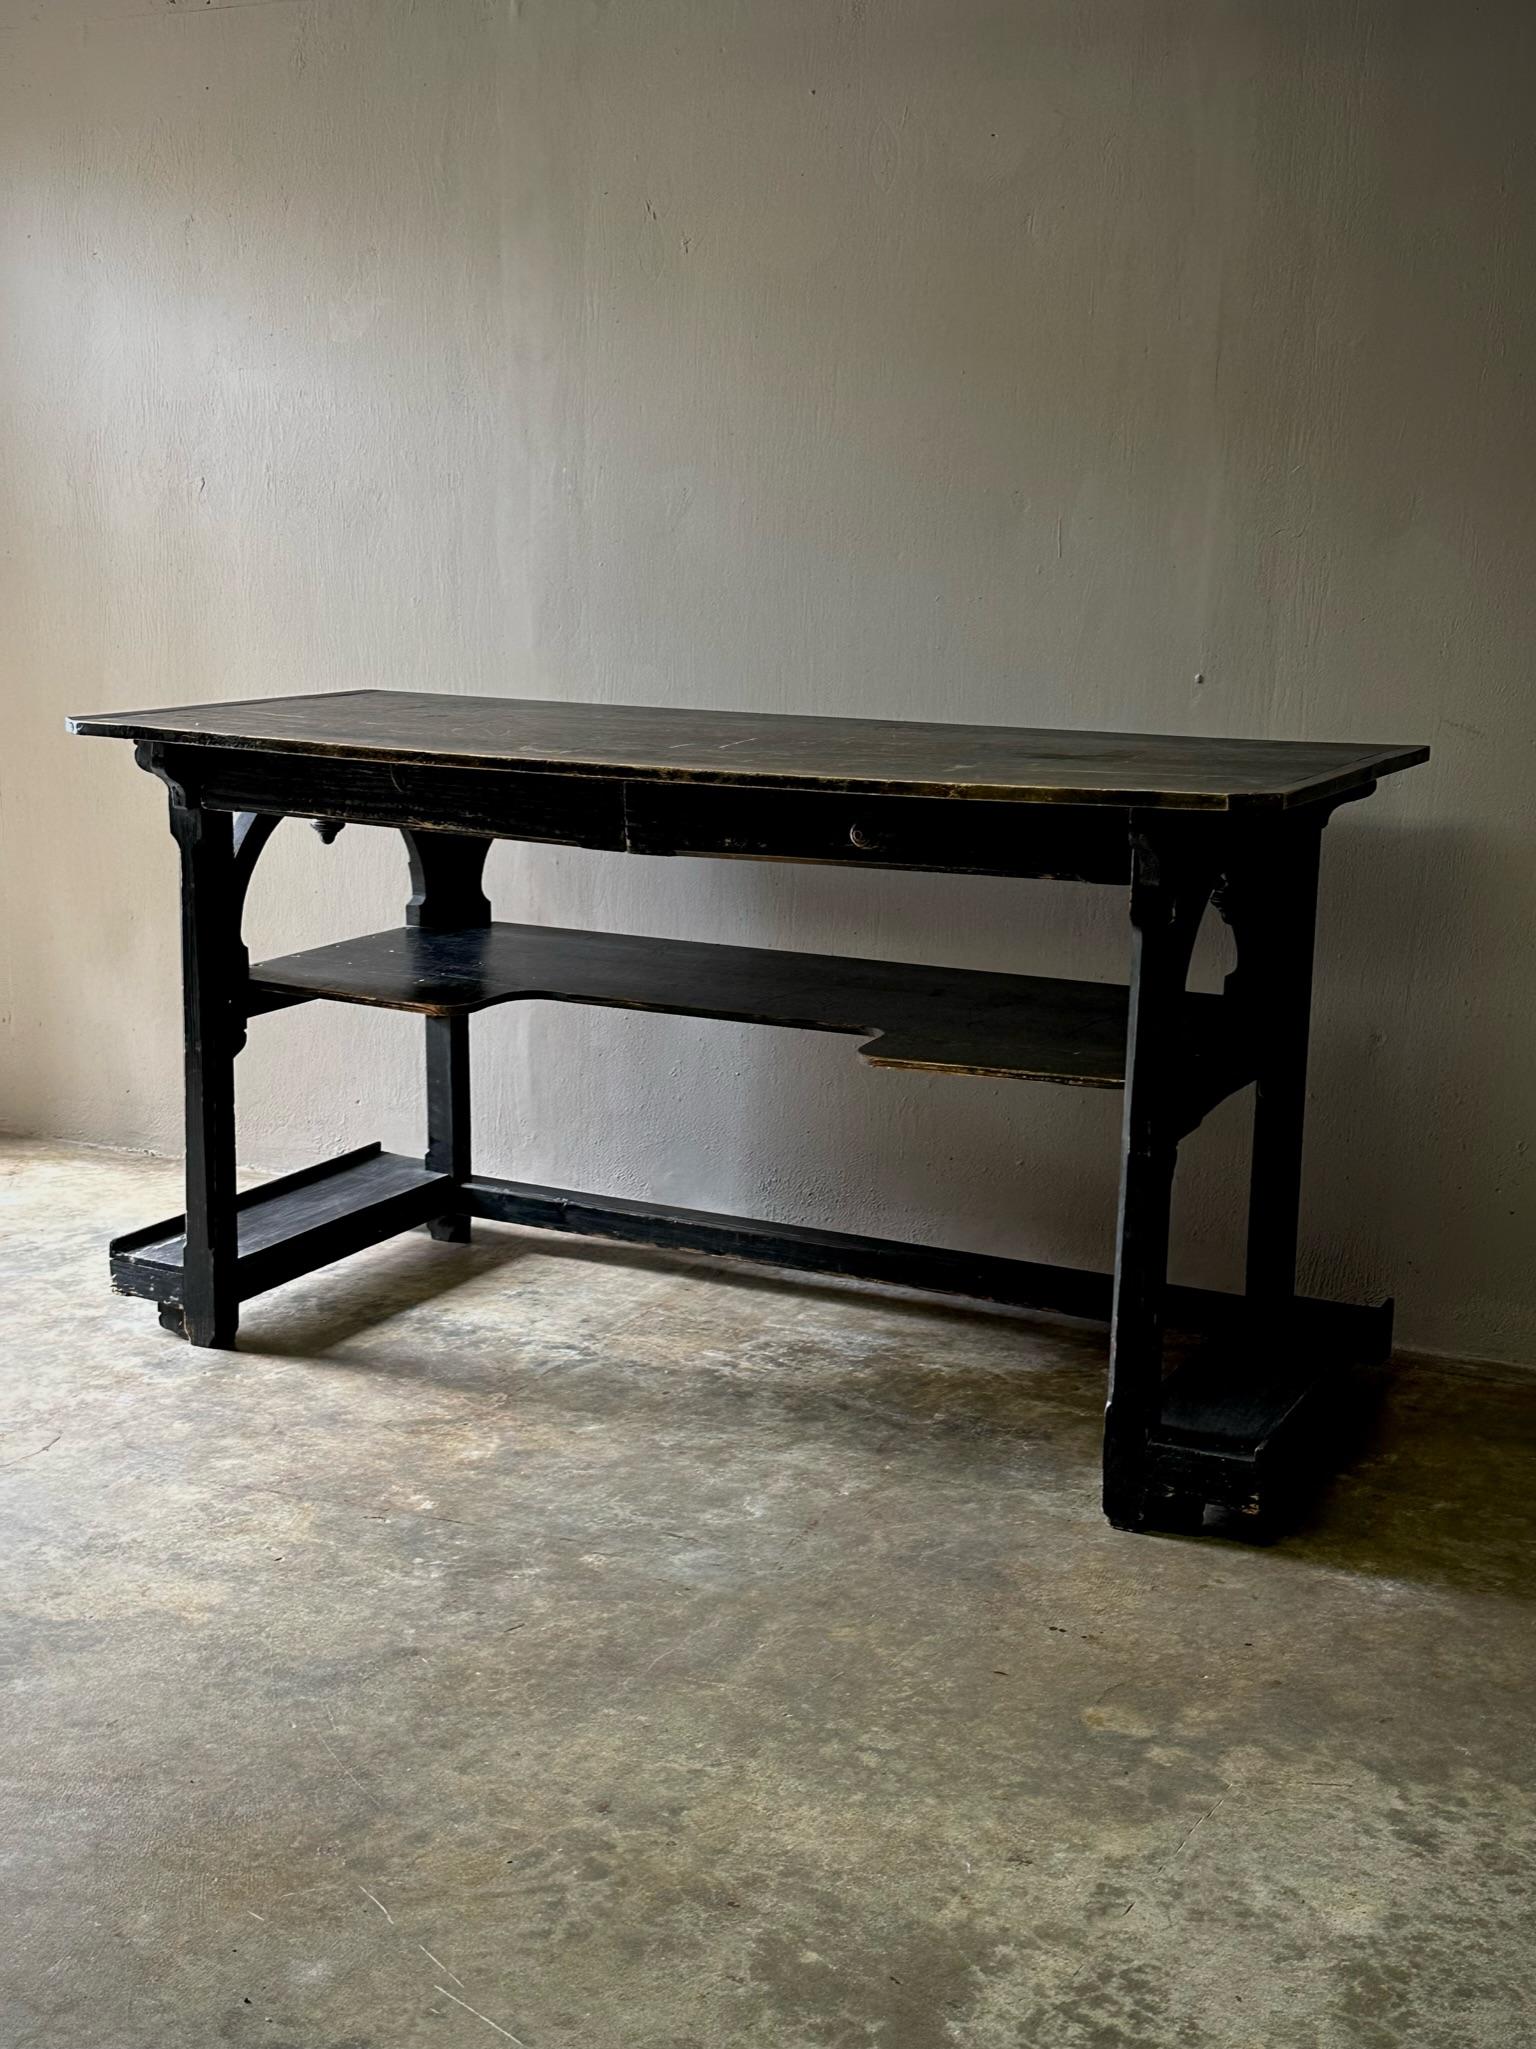 French 19th century ebonized wood architect's desk. Features elegant utilitarian lines and exquisite hand-carved detail work. With its dark, rich patina and versatile proportions, this transitional piece would work in a variety of settings.